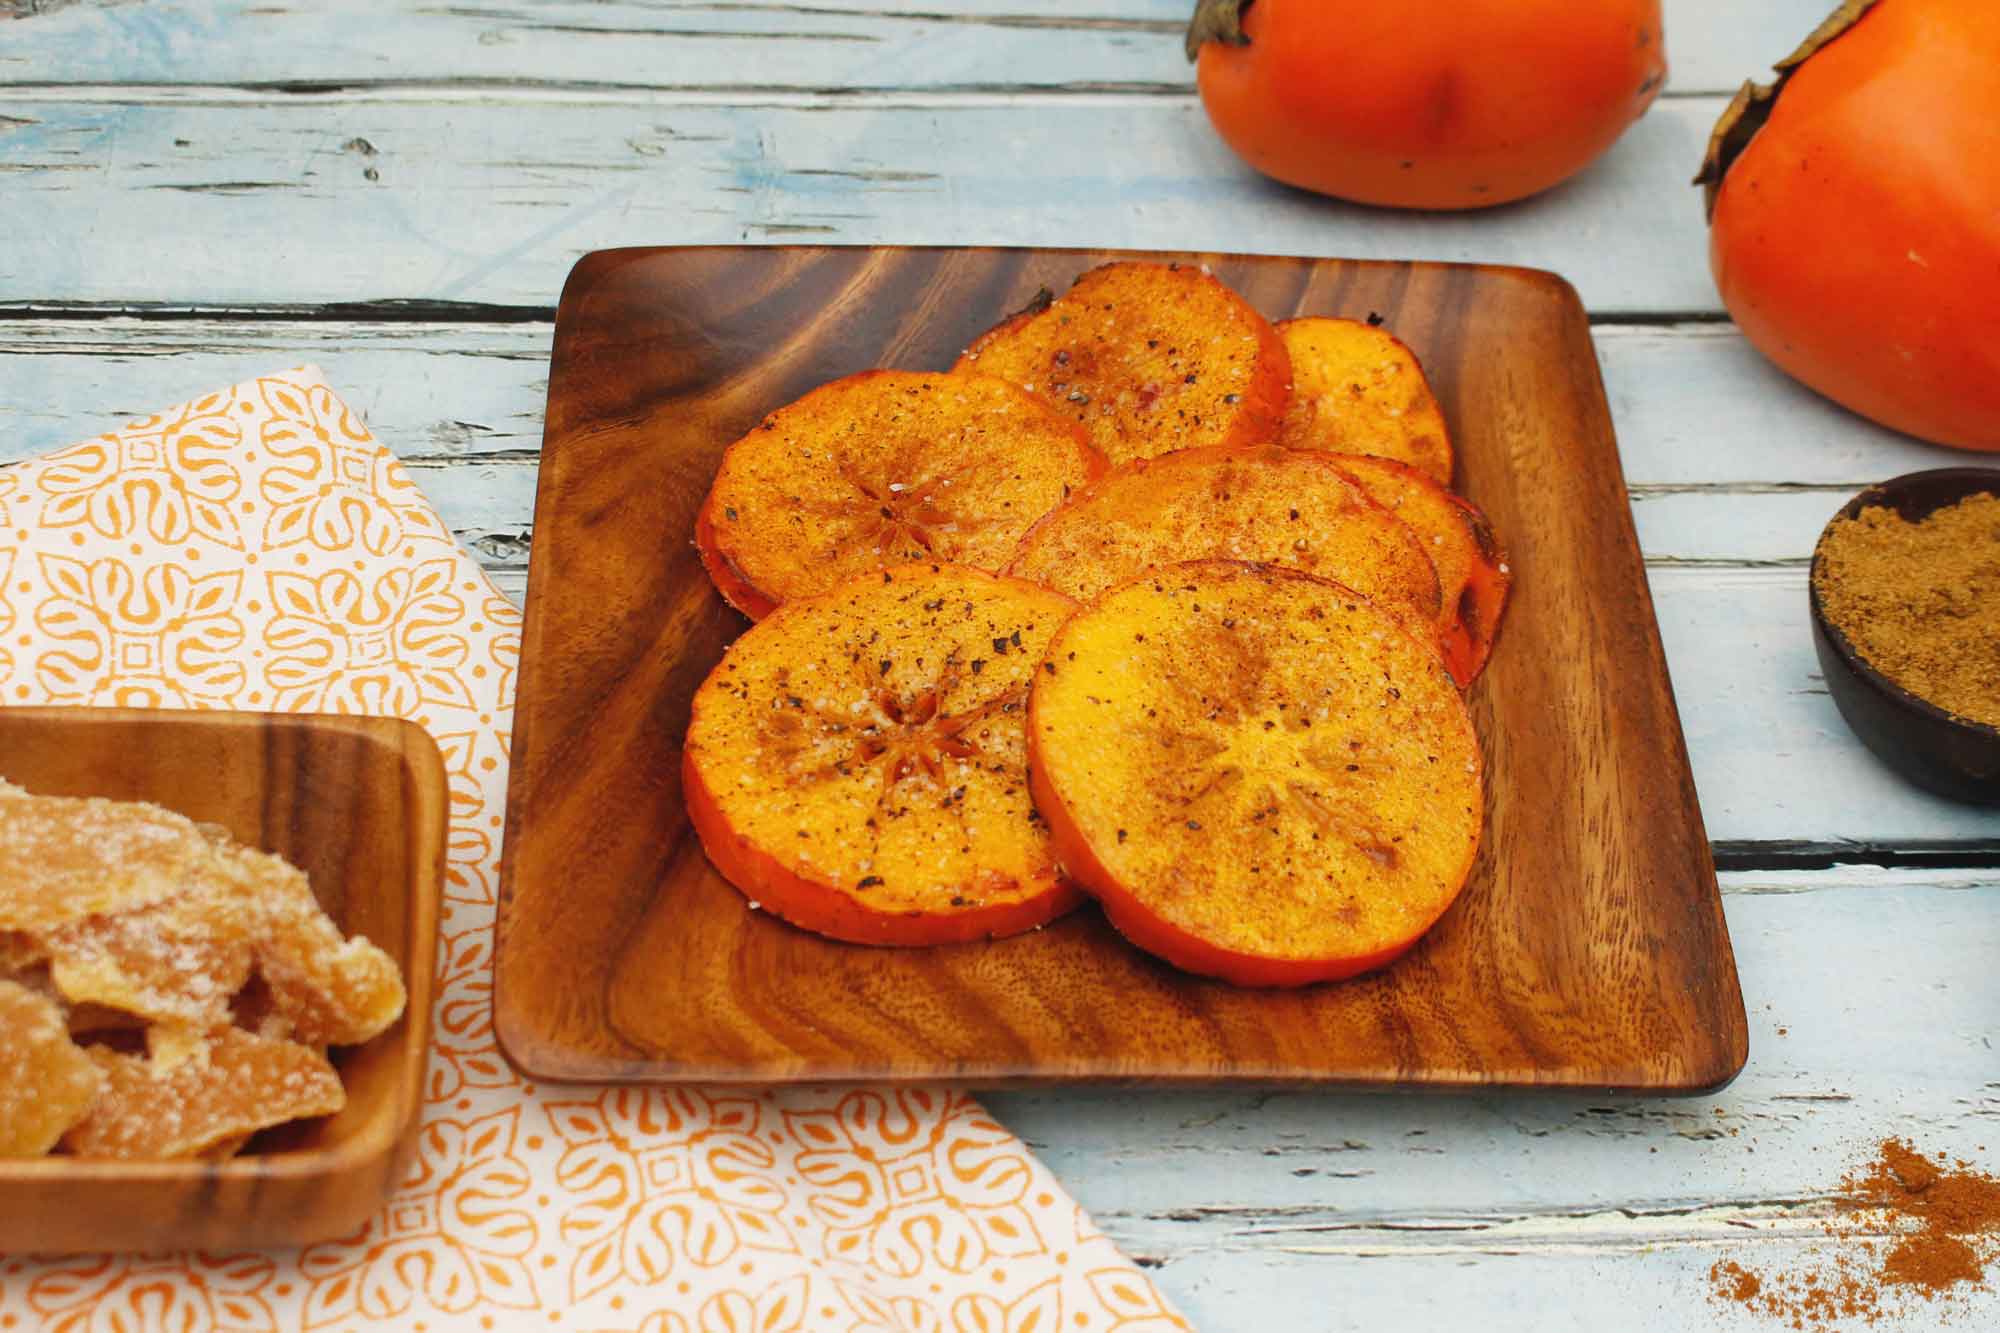 Spiced Roasted Persimmon Slices